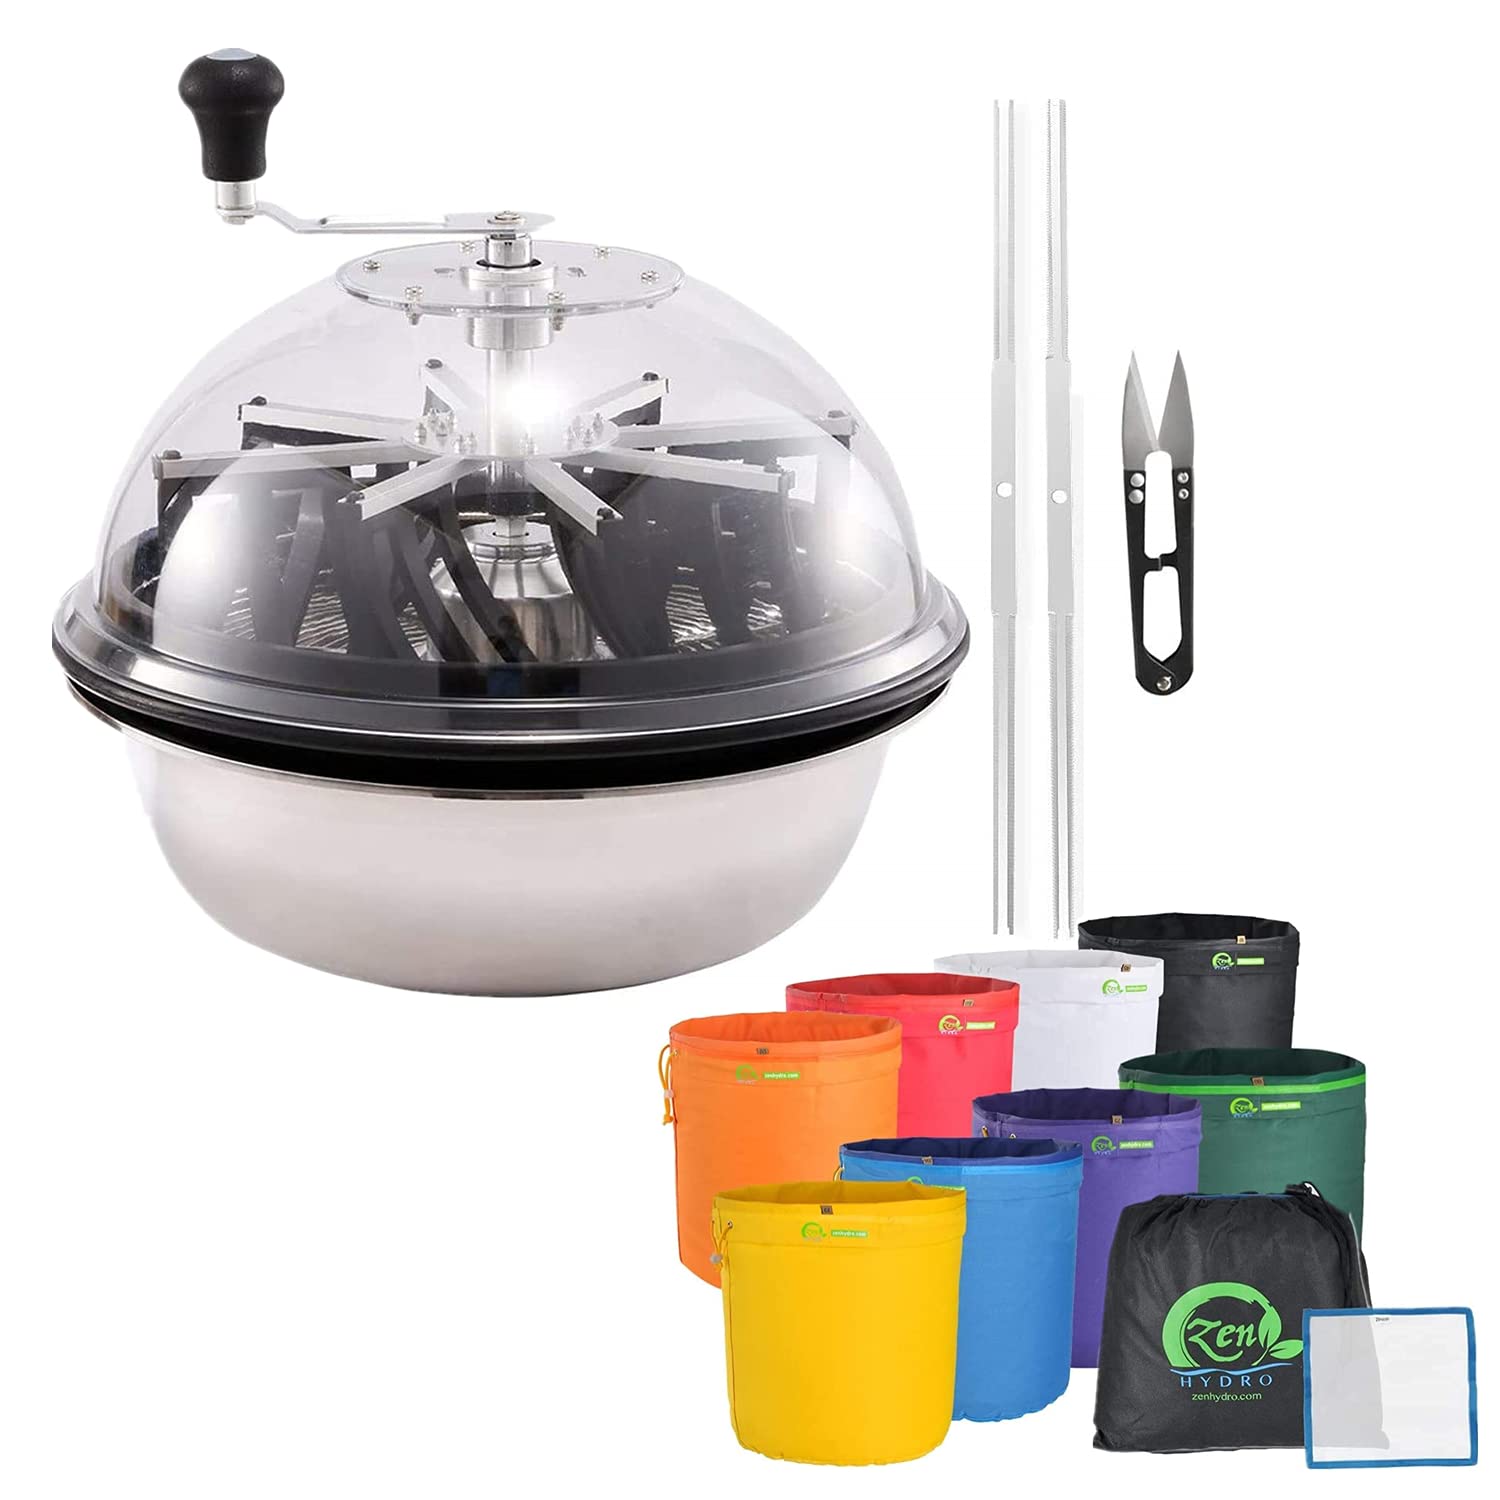 Find the highest-rated hydroponic gear on Amazon and take your gardening to new heights. Shop now for the best tools and accessories available.